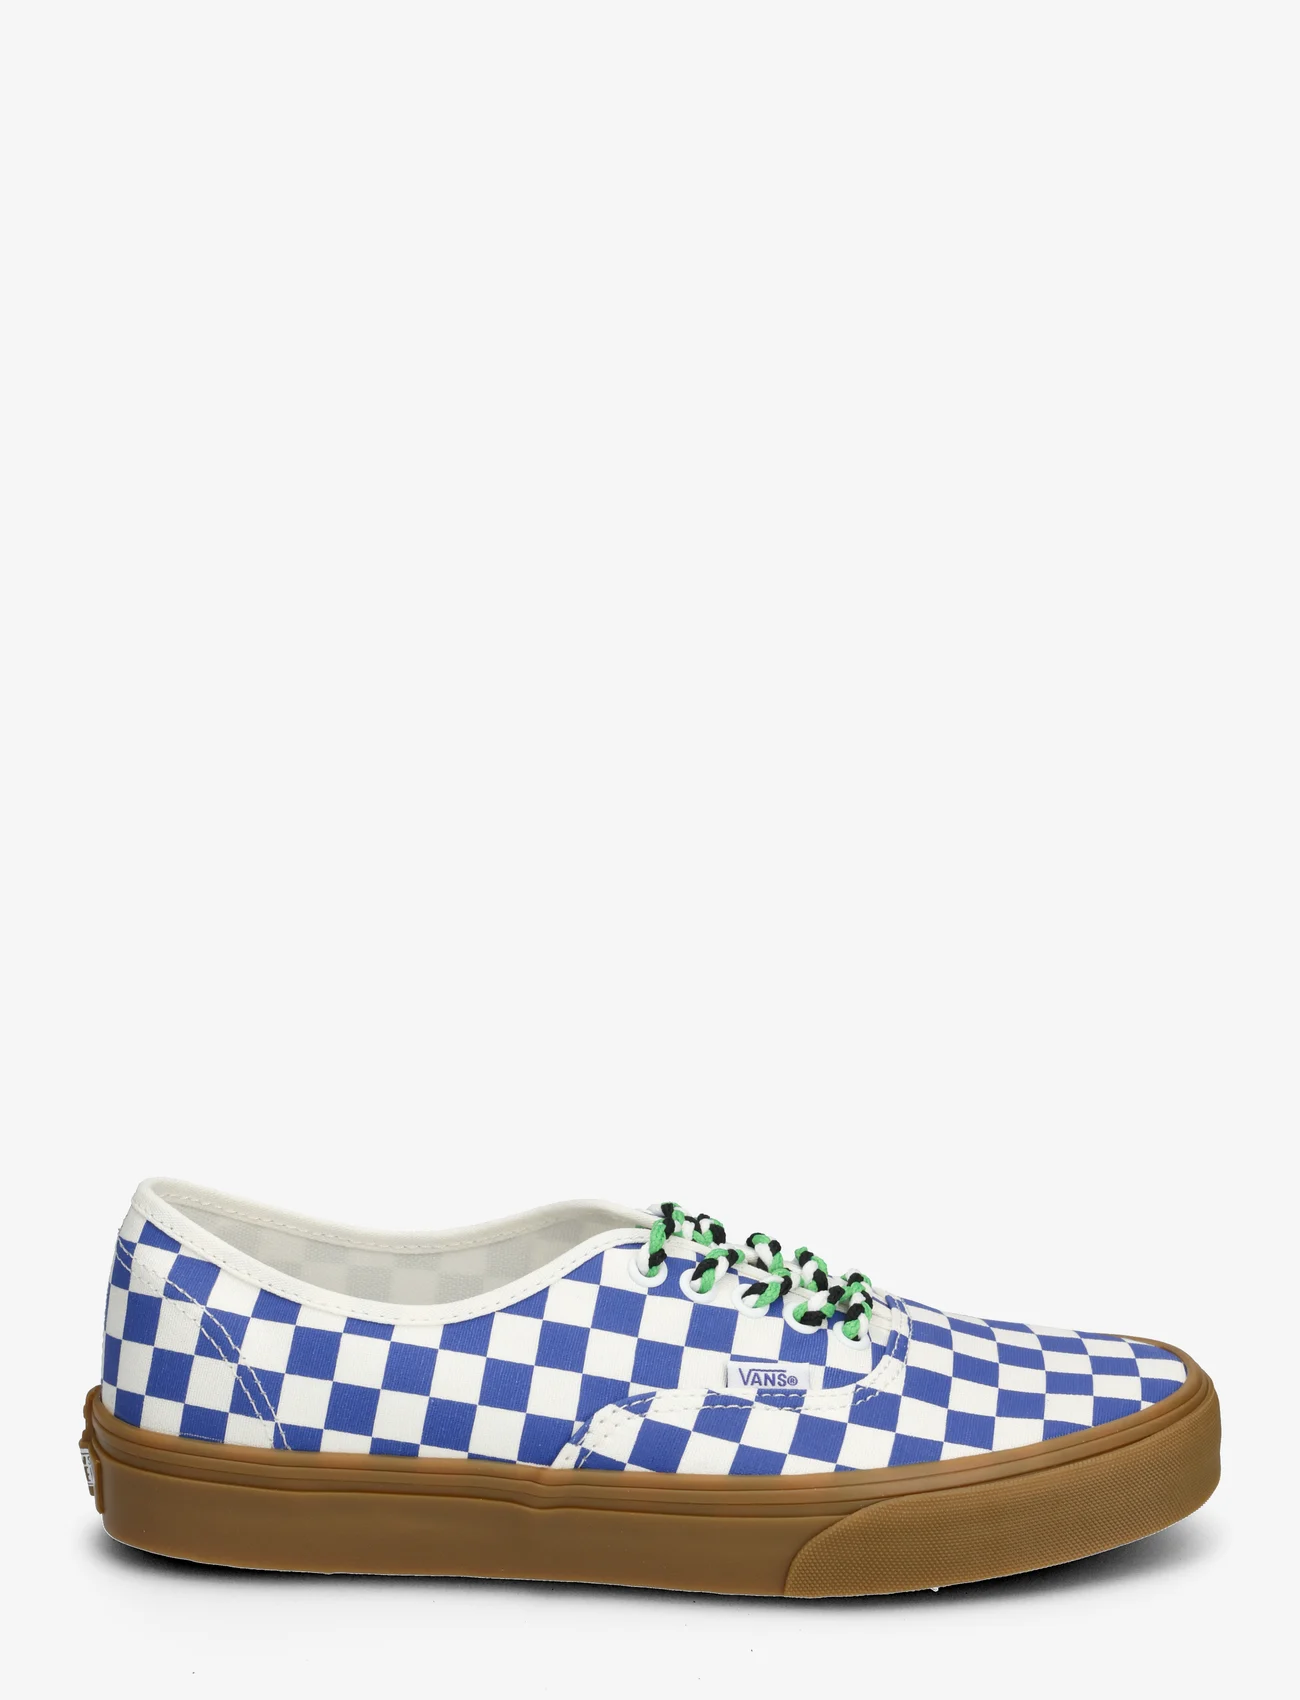 VANS - Authentic - laag sneakers - checkerboard blue/white - 1